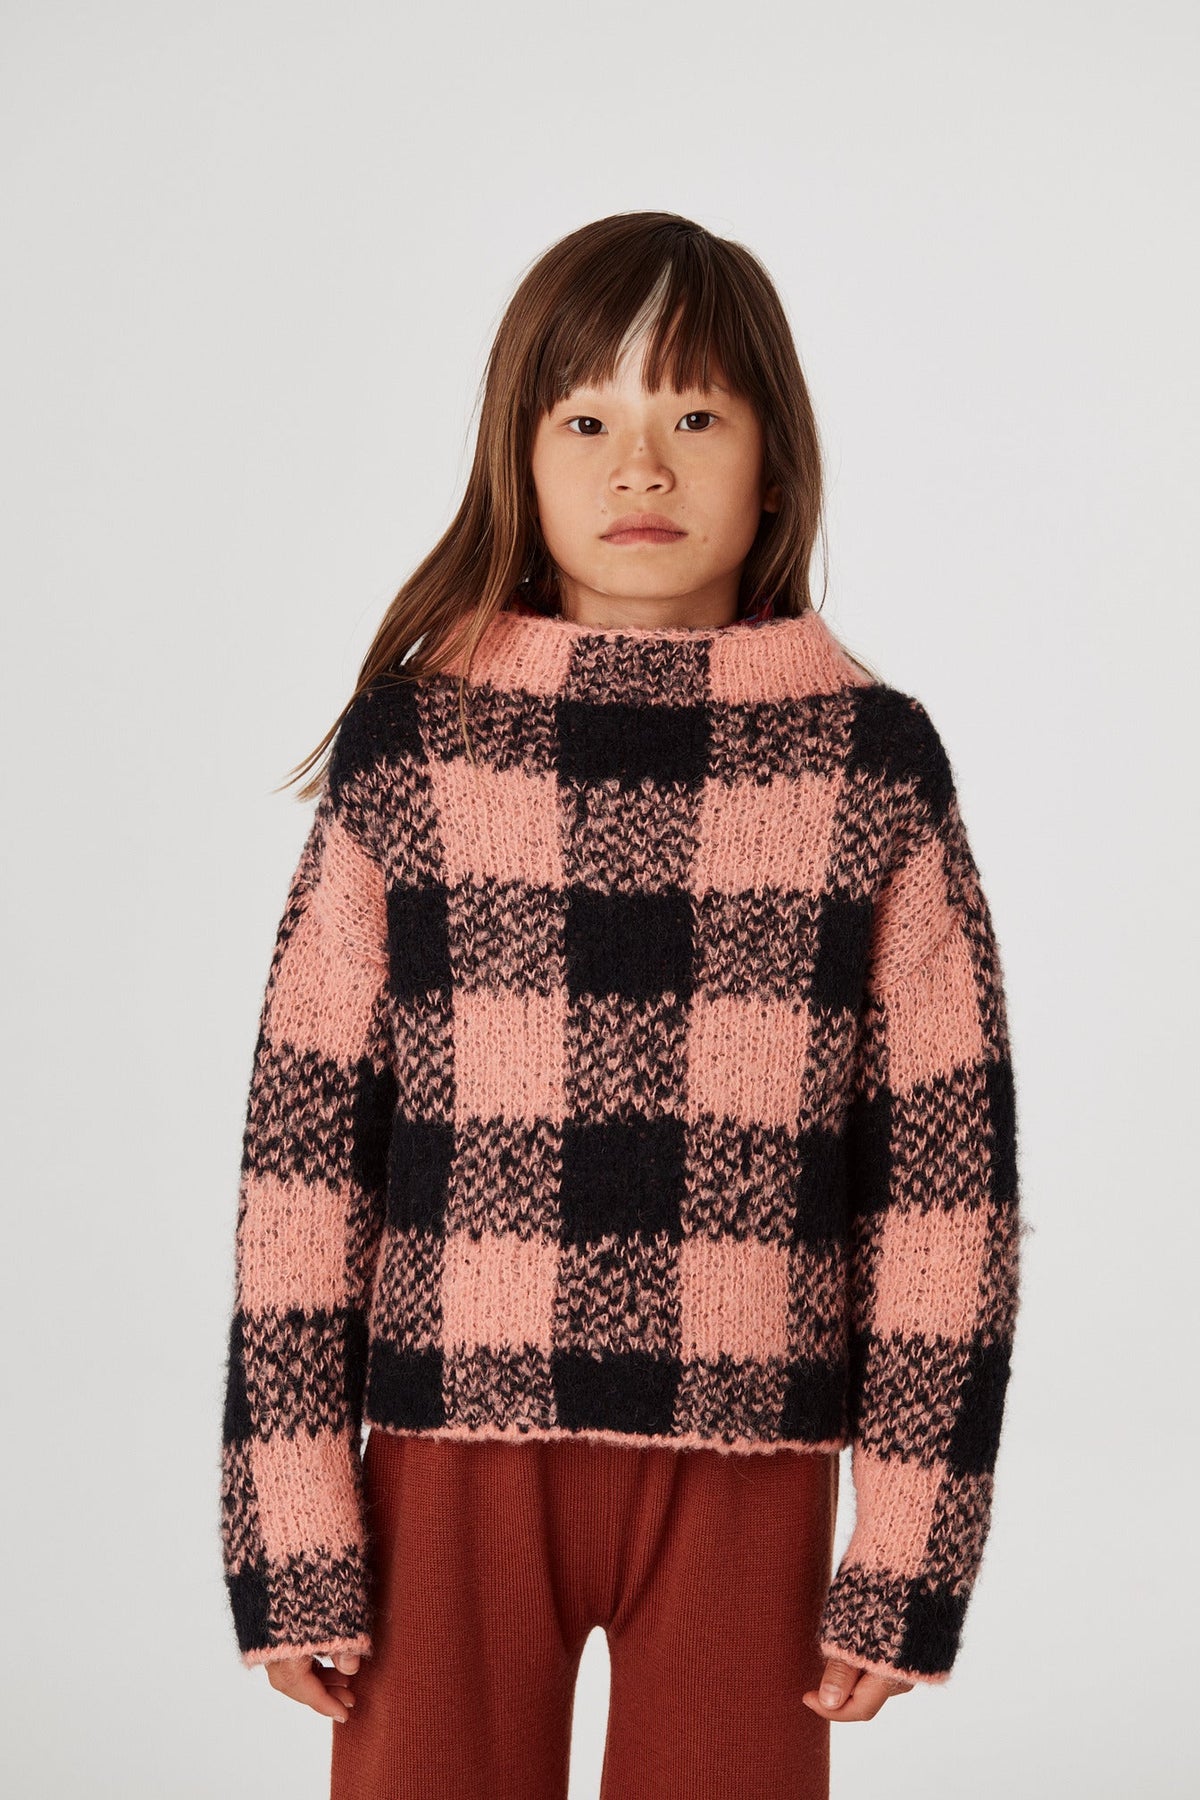 Boucle Plaid Pullover - Grapefruit+Model is 48 inches tall, 51lbs, wearing a size 7-8y